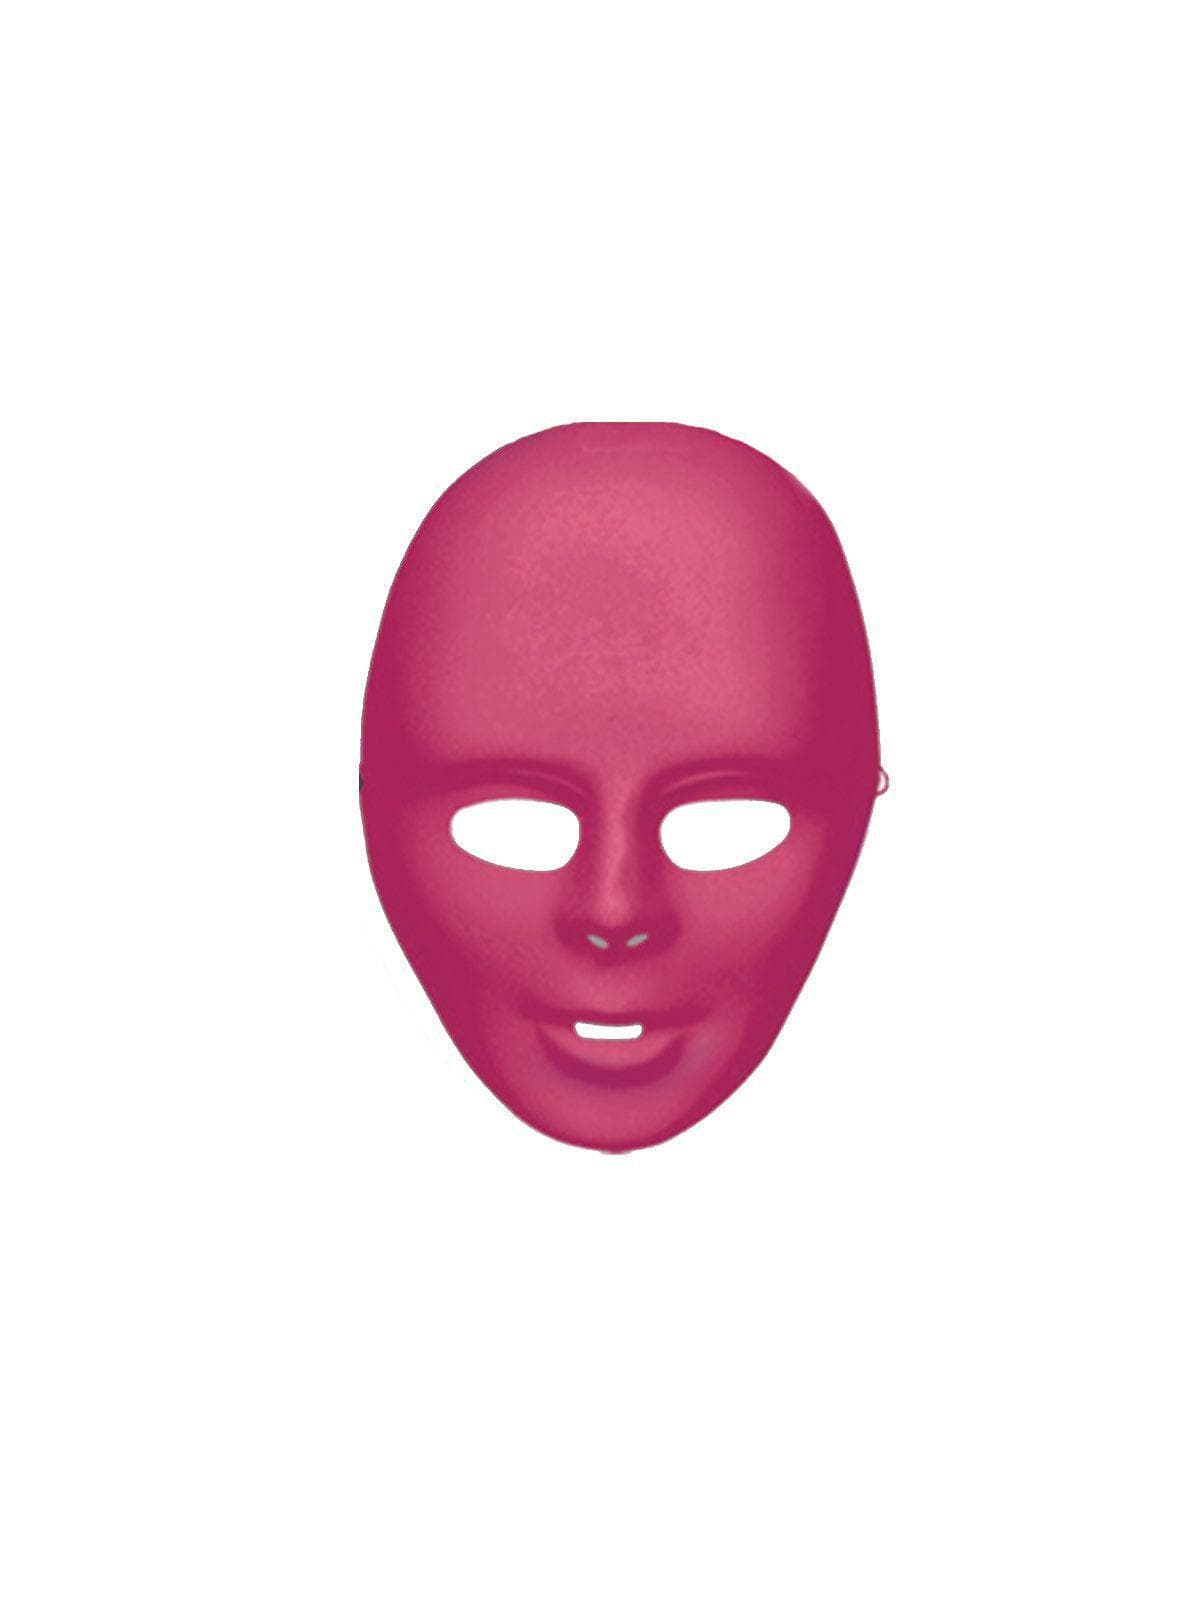 Pink Full Face Mask - costumes.com